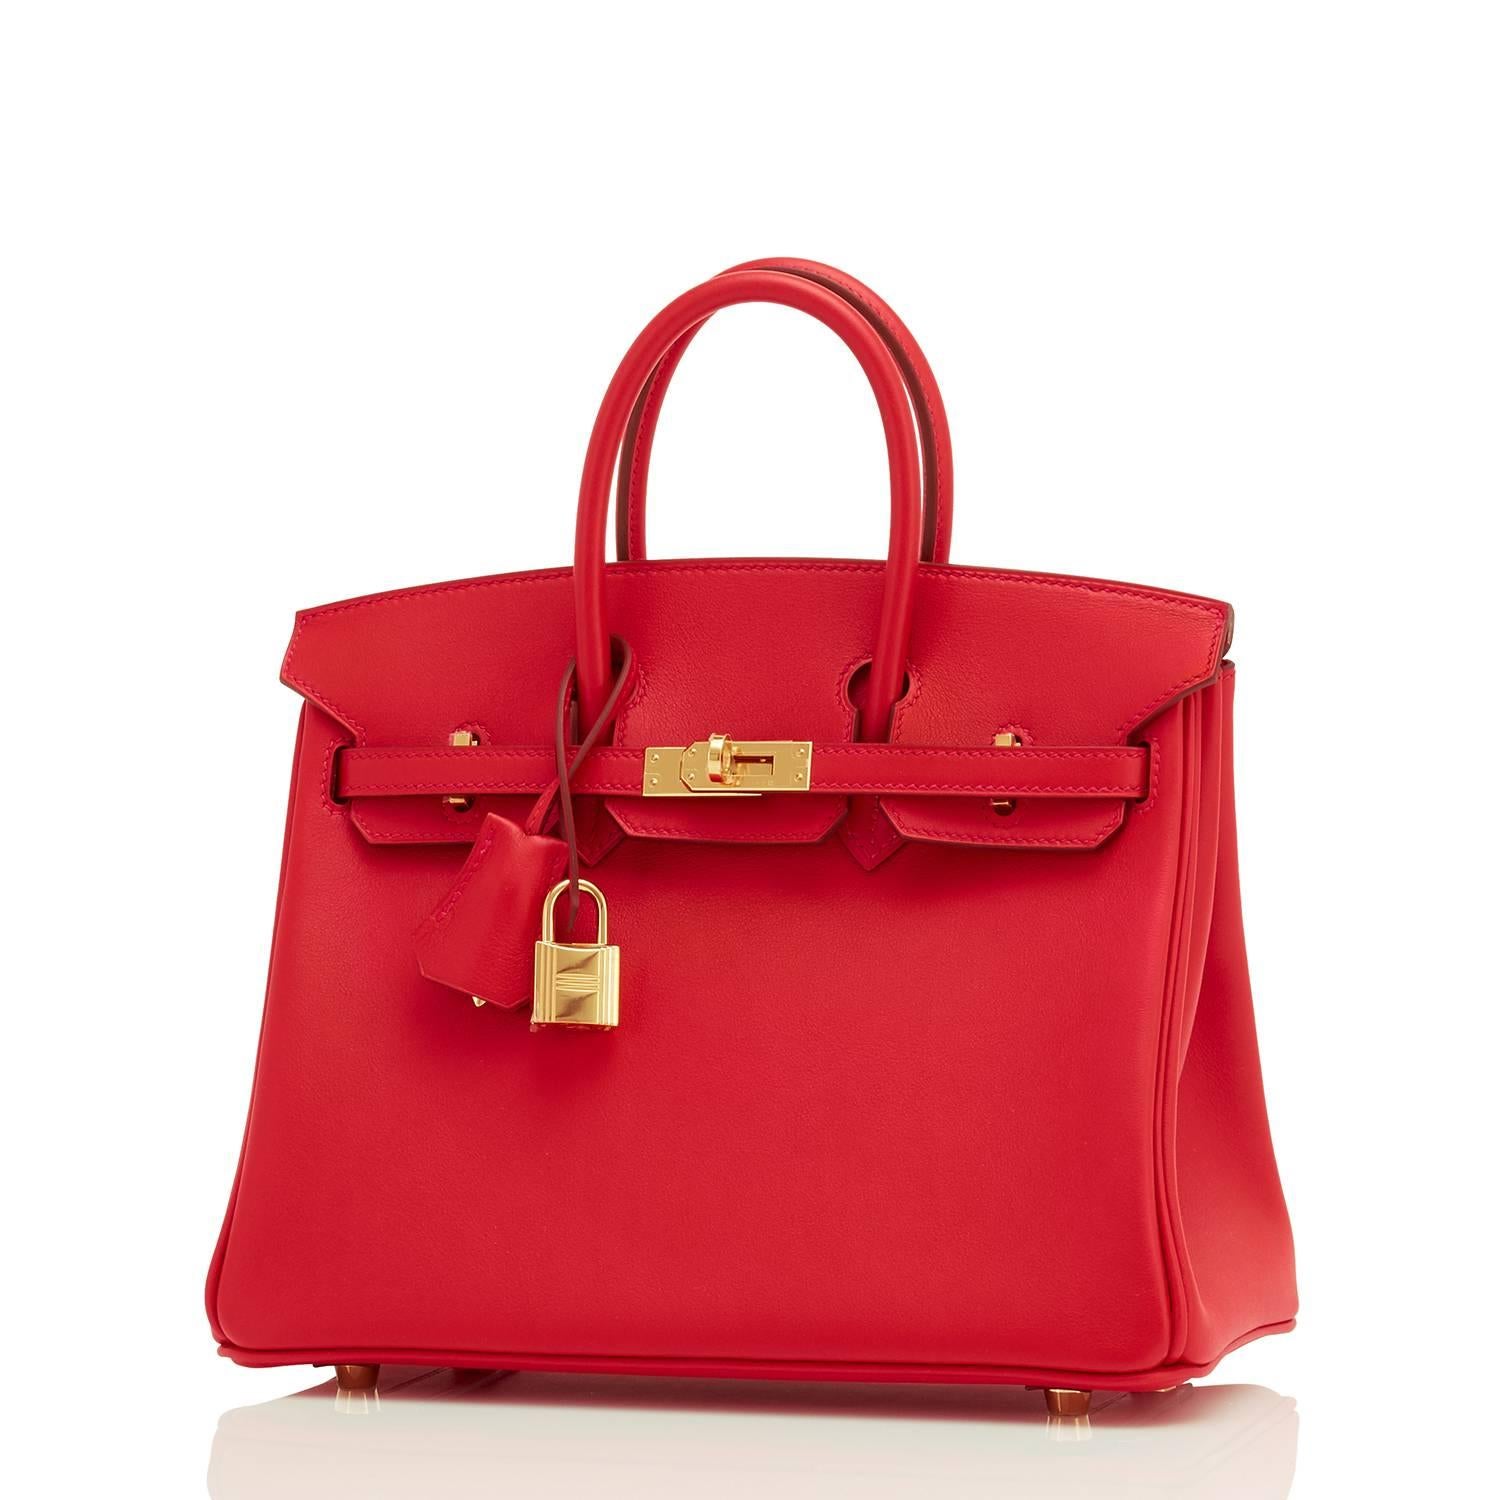 Hermes Vermillion Lipstick Red 25cm Swift Birkin Gold Hardware Jewel
Brand New in Box.  Store Fresh. Pristine Condition (with plastic on hardware)
Comes full set with keys, lock, clochette, a sleeper for the bag, rain protector, and Hermes